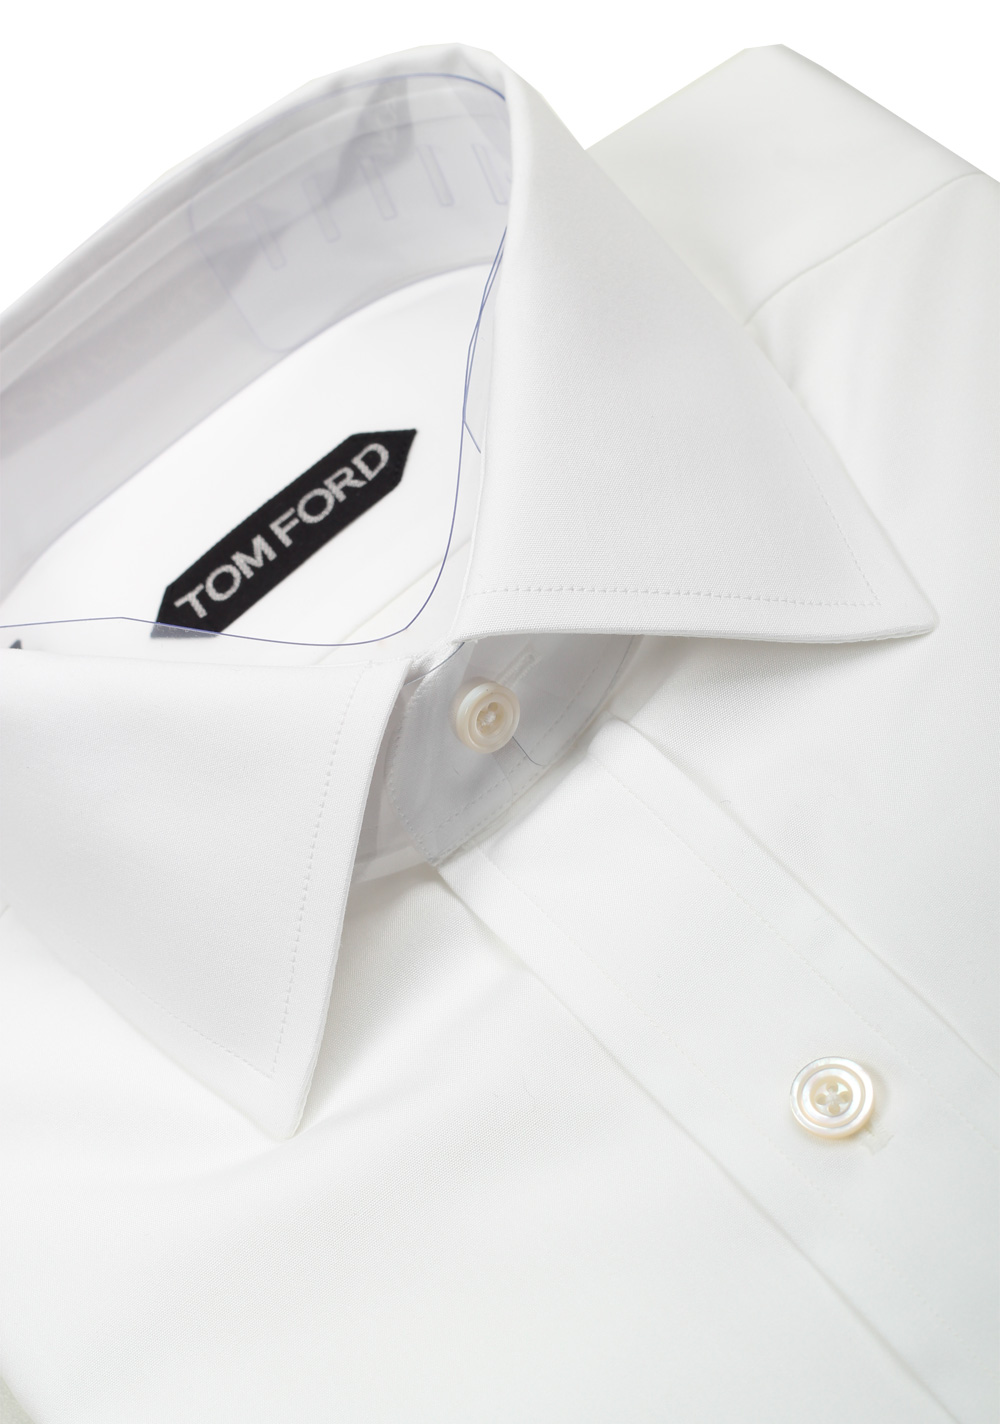 TOM FORD Solid White Dress Spread Shirt French Cuffs Size 38 / 15 U.S. Slim Fit | Costume Limité